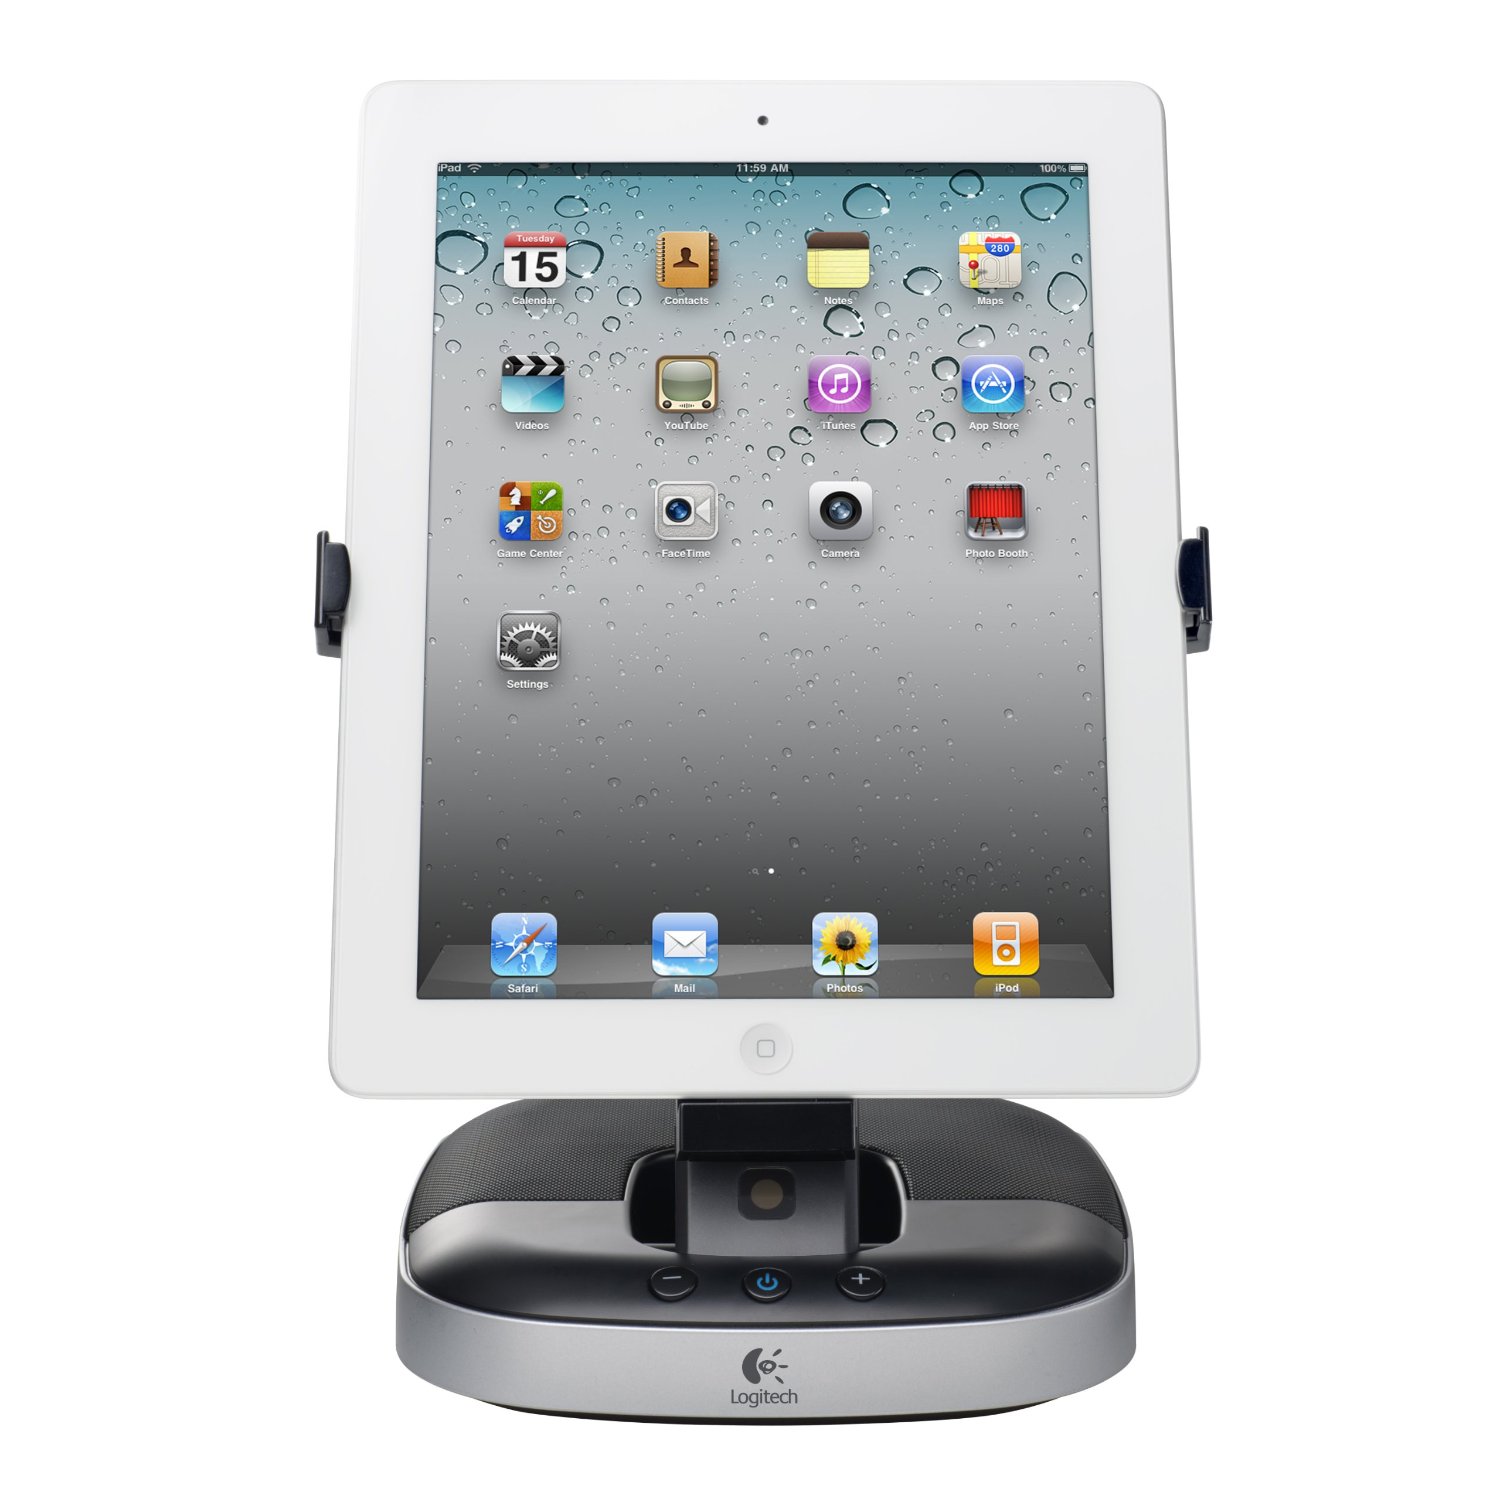 http://thetechjournal.com/wp-content/uploads/images/1203/1331142371-logitech-speaker-stand-and-charging-station-for-ipad--1.jpg